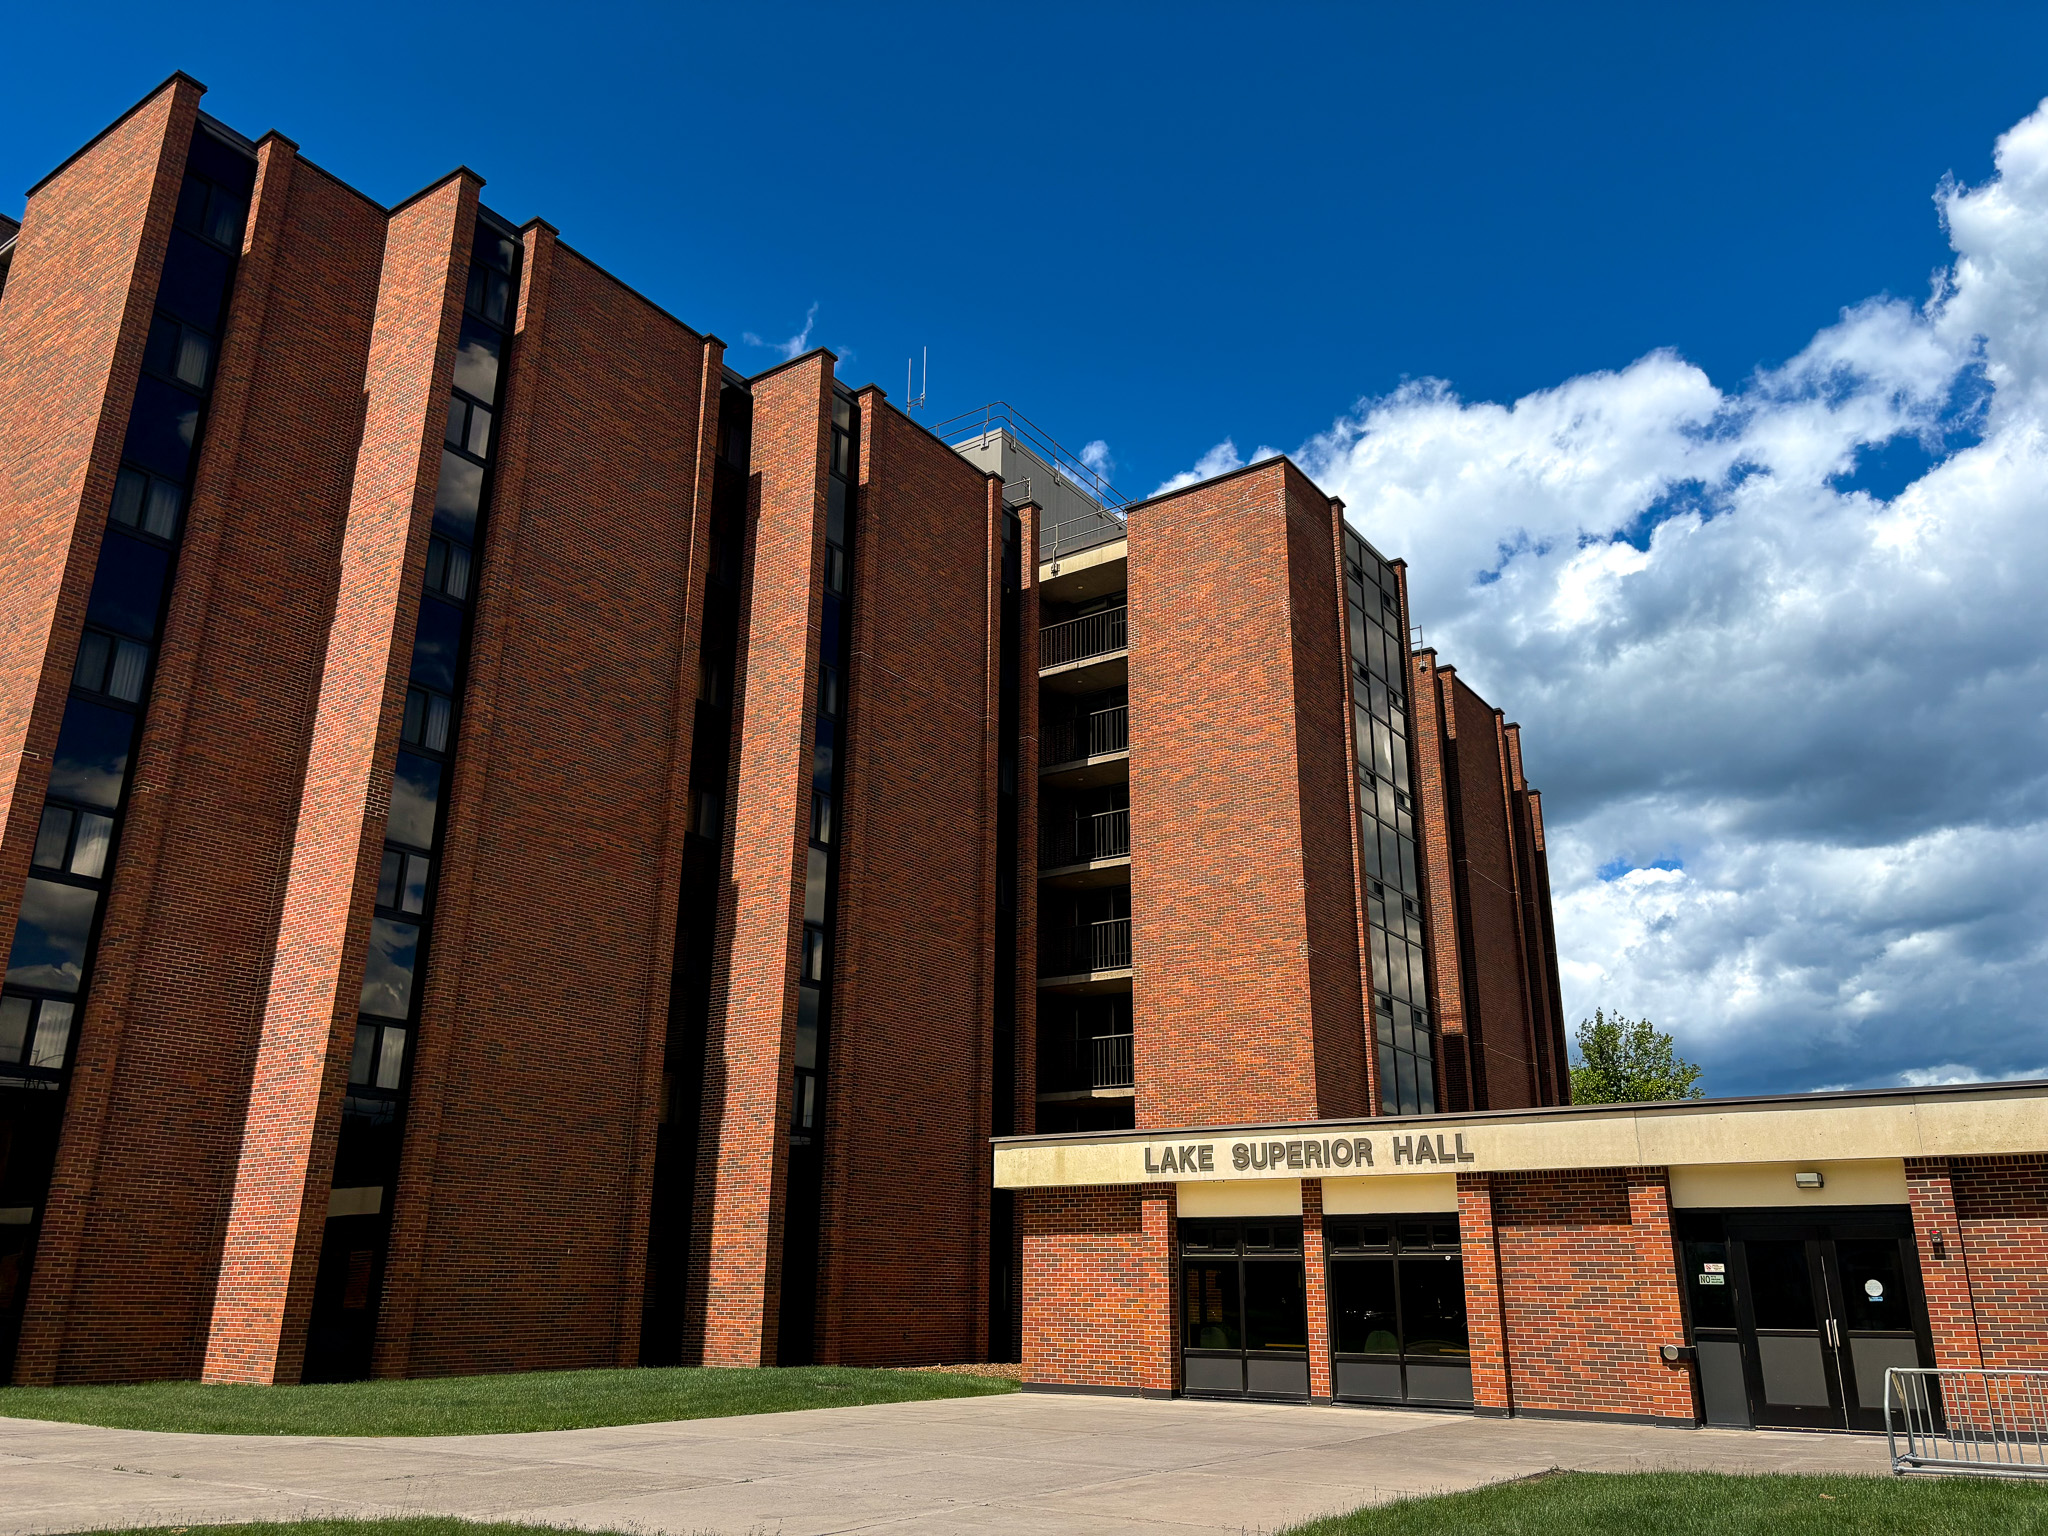 This photo depicts residence hall Lake Superior Hall